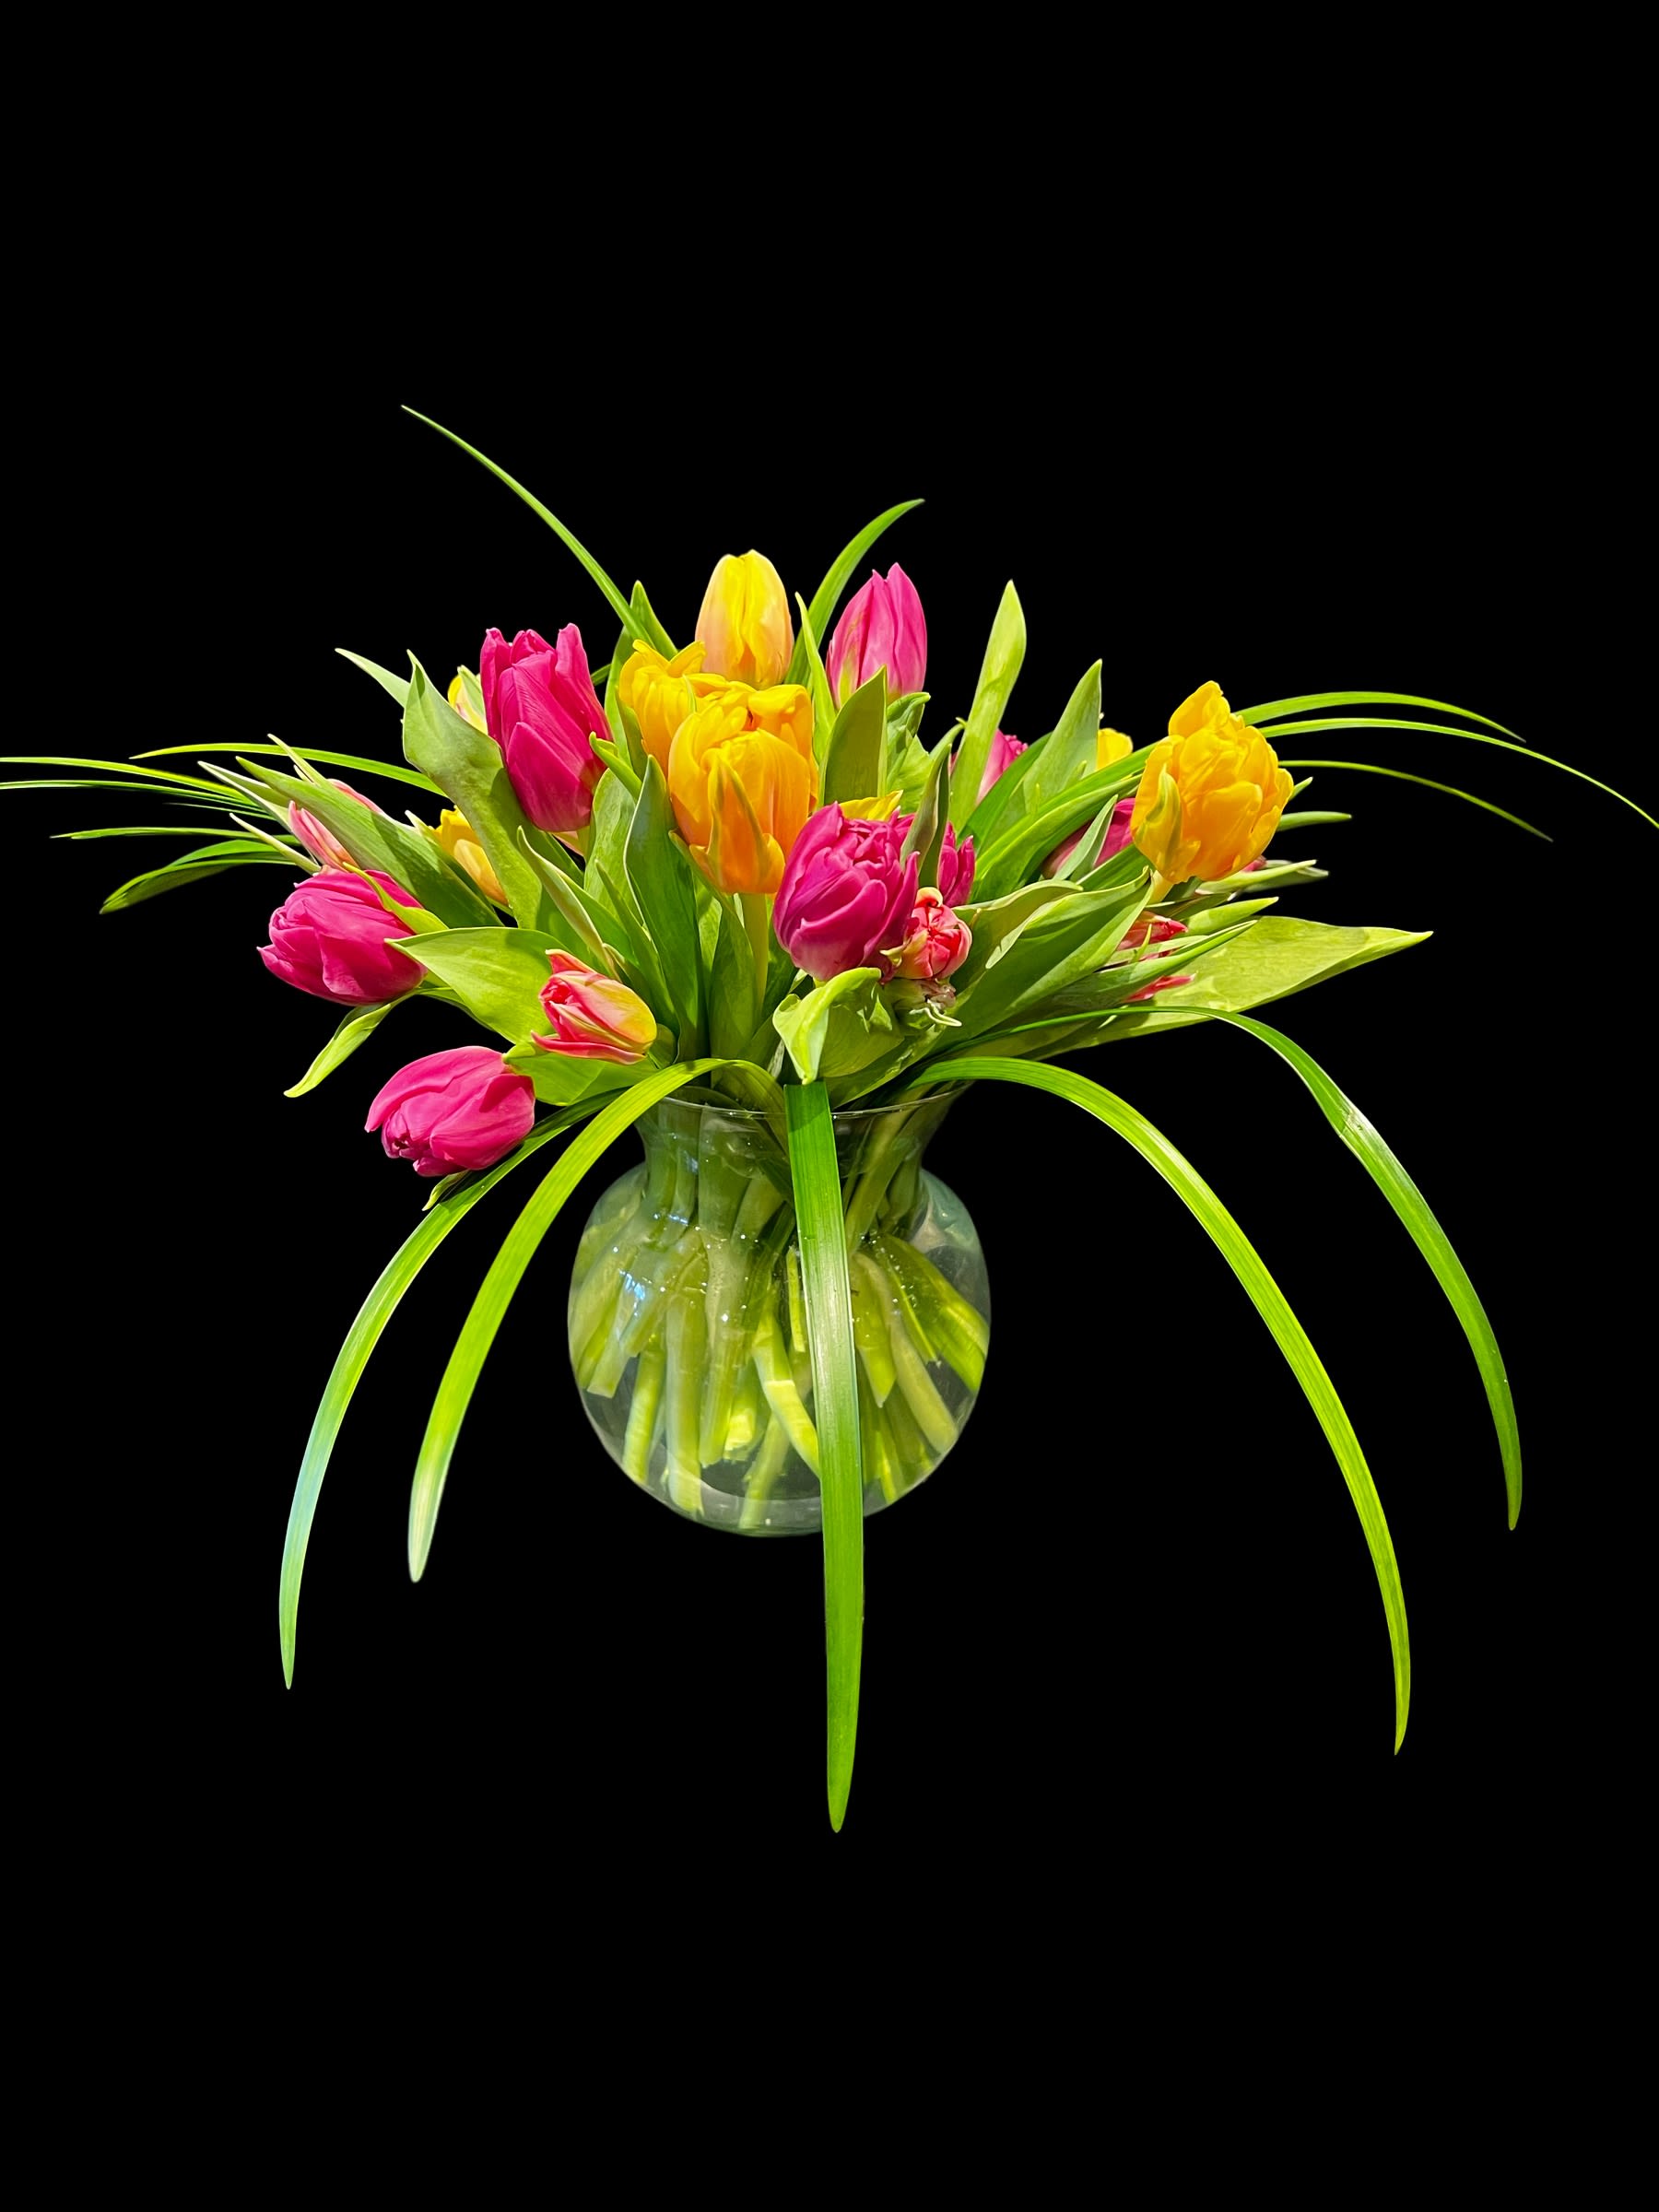 30 Multi colored tulips in a vase/colors and vases vary - The heralds of Spring! Tulips! 2.5 dozen!  Aprox 14x14&quot;